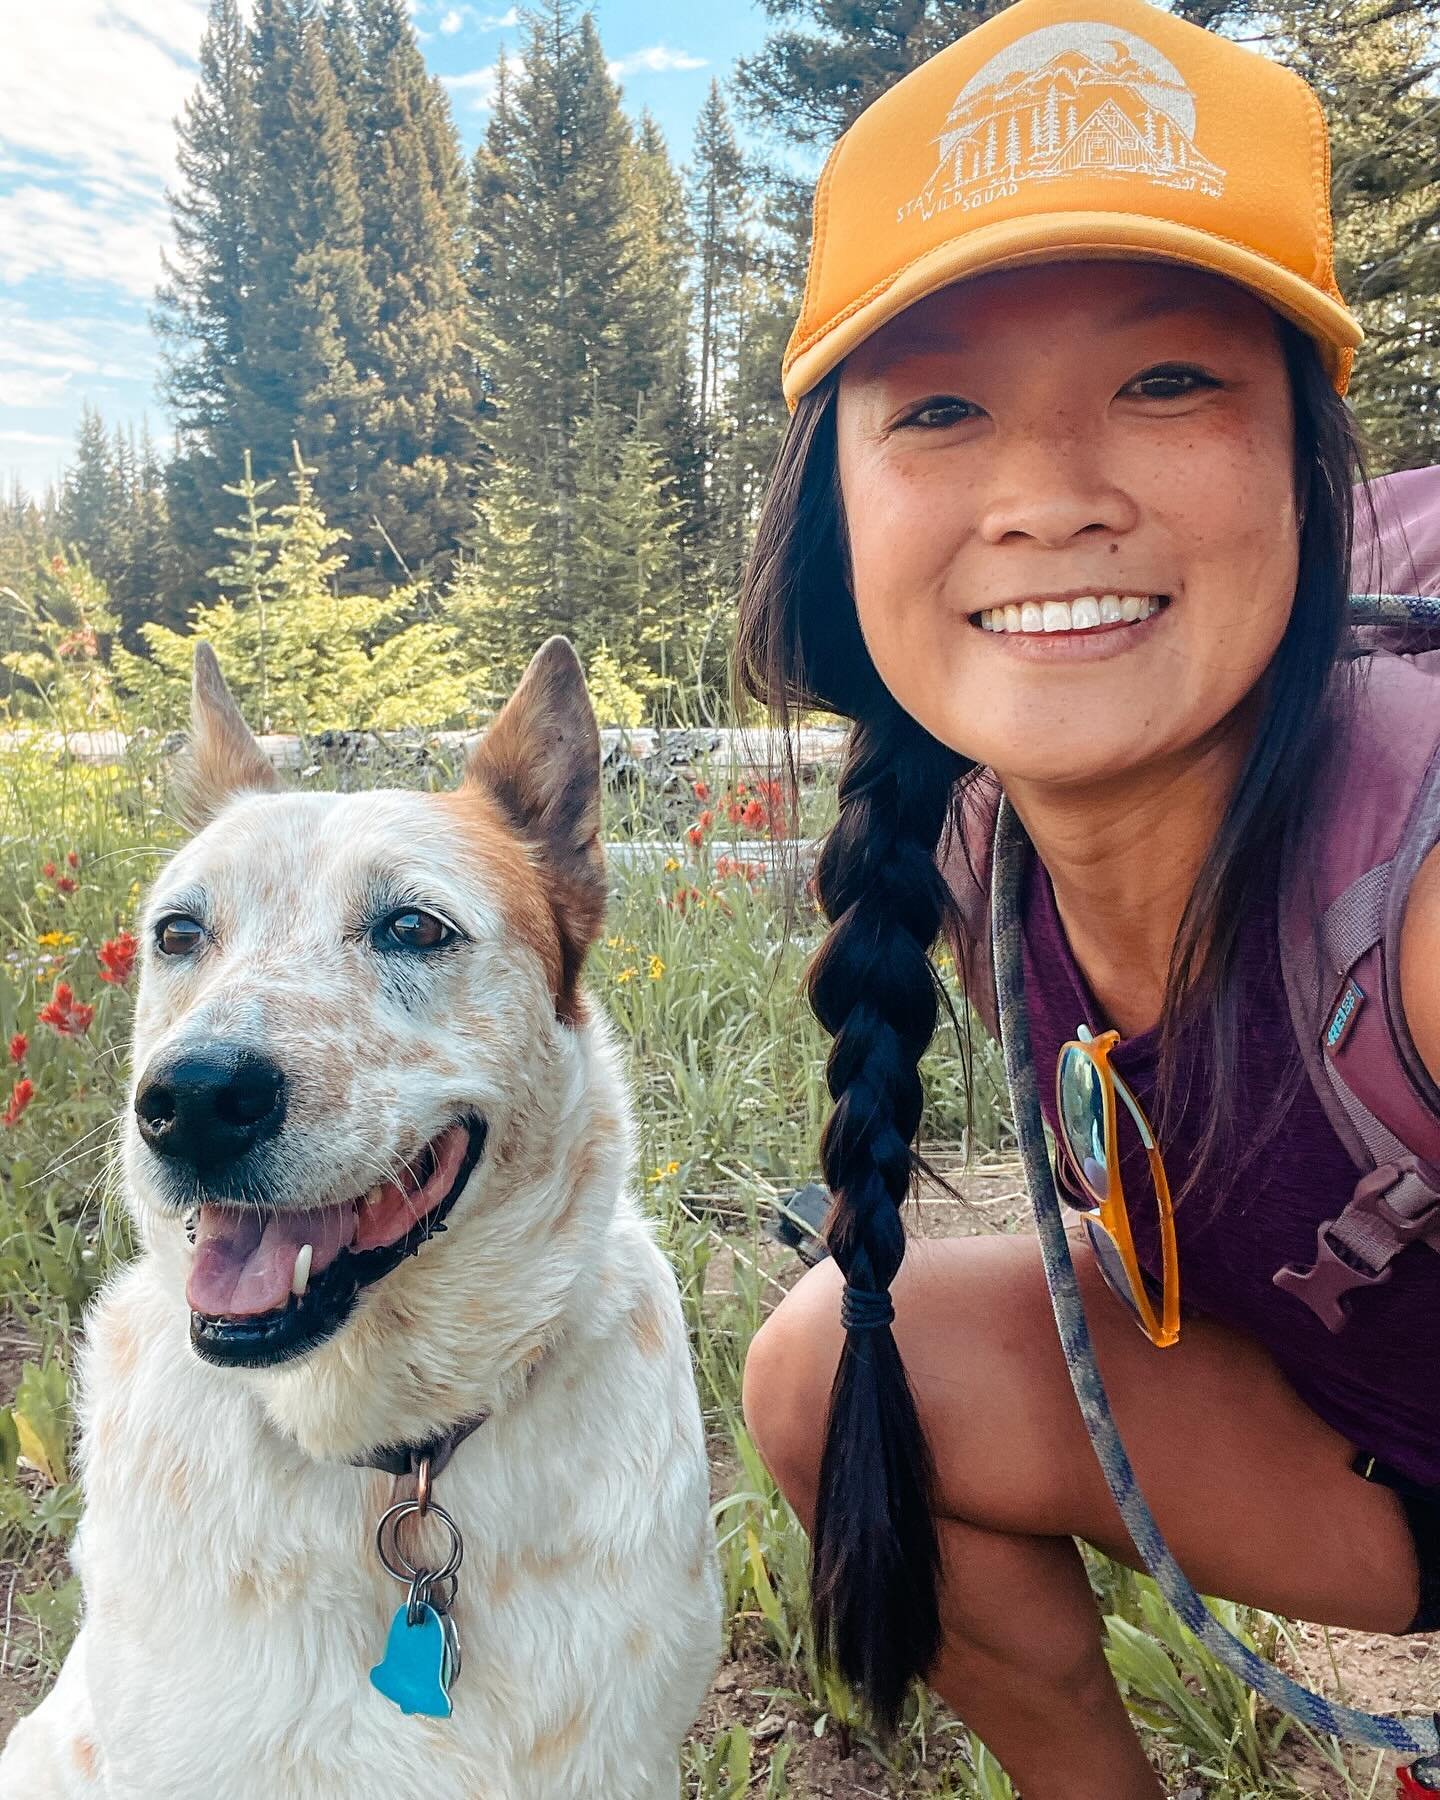 🐾☀️It&rsquo;s hard to believe but it&rsquo;s been over 8 years of adventures with this little deaf rescue💛

Arya is my longest employee, best tent snuggler, photoshoot supervisor, camp dinner clean up crew, trail buddy, and overall bestie in gettin